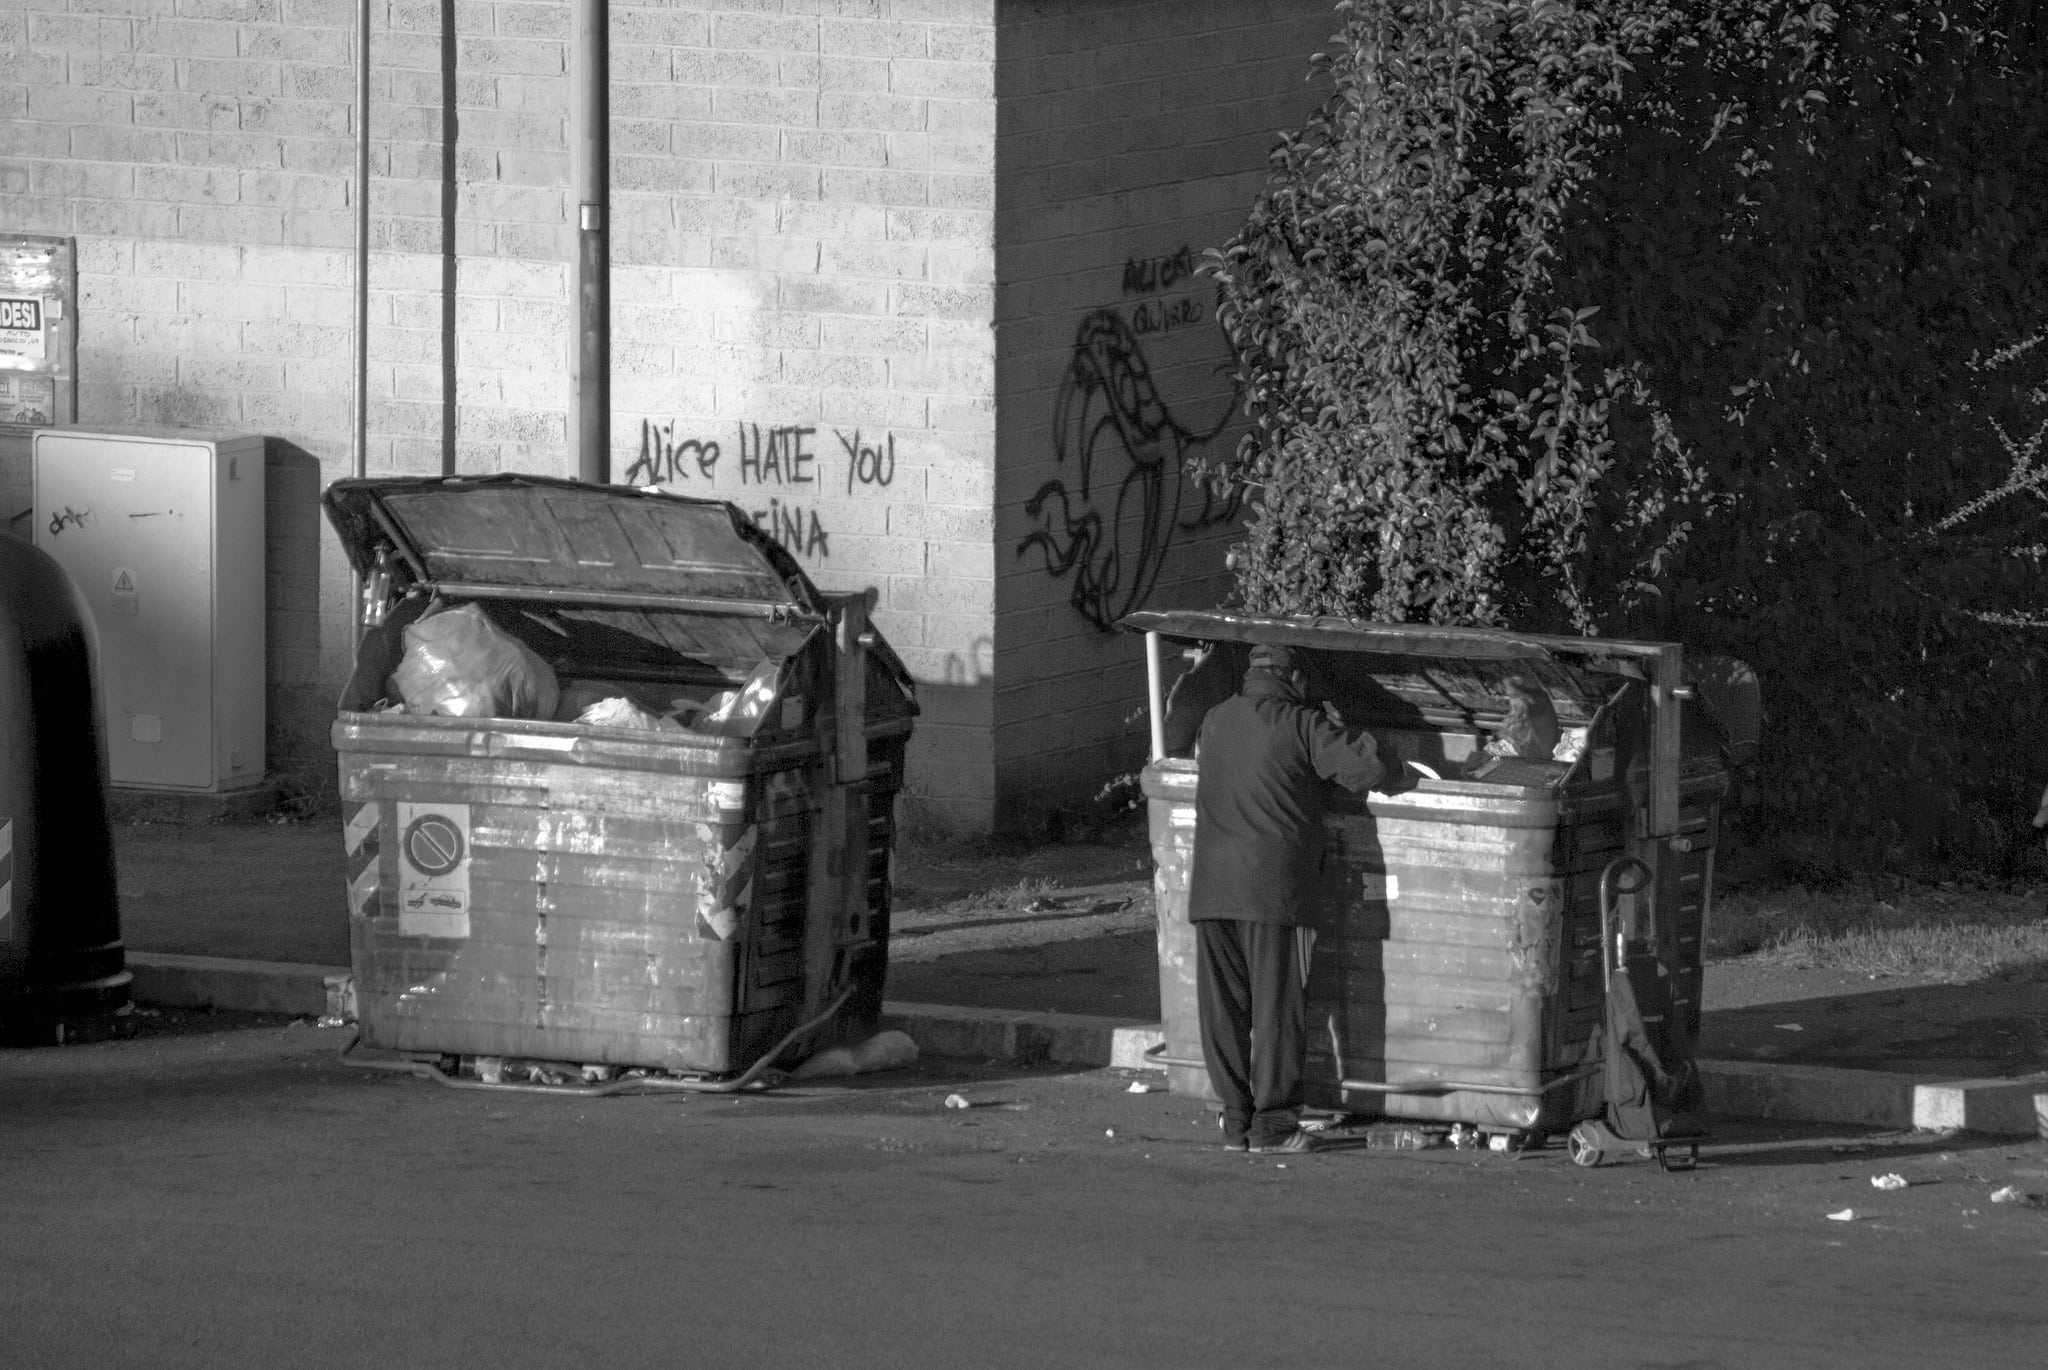 grayscale photo of person looking at trash bin, man, poor, misery